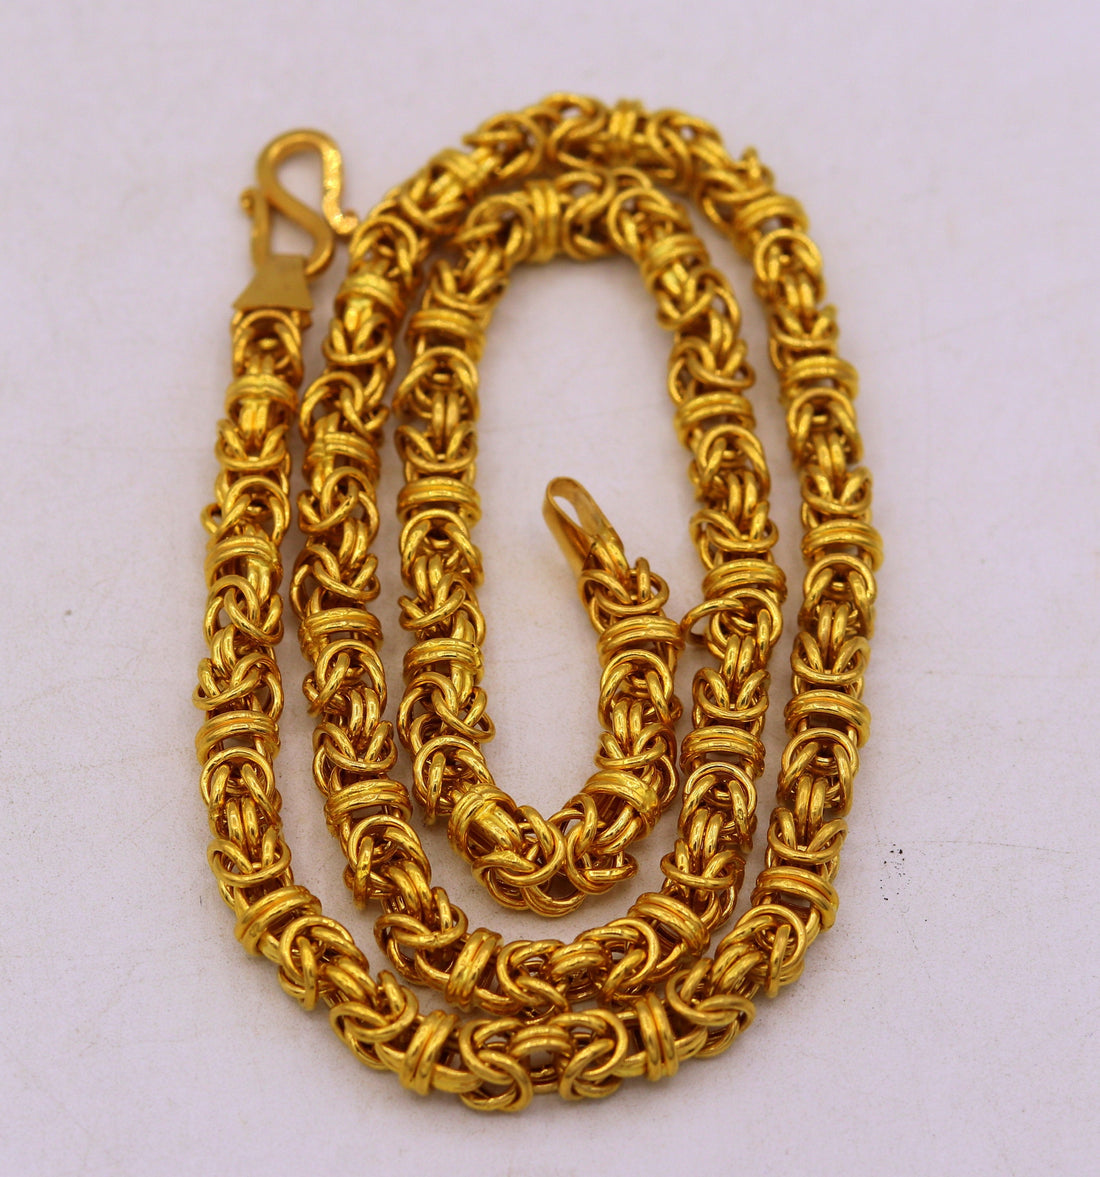 New stylish 22kt yellow gold handmade fabulous byzantine chain necklace unisex gifting unisex jewelry from rajasthan india - TRIBAL ORNAMENTS